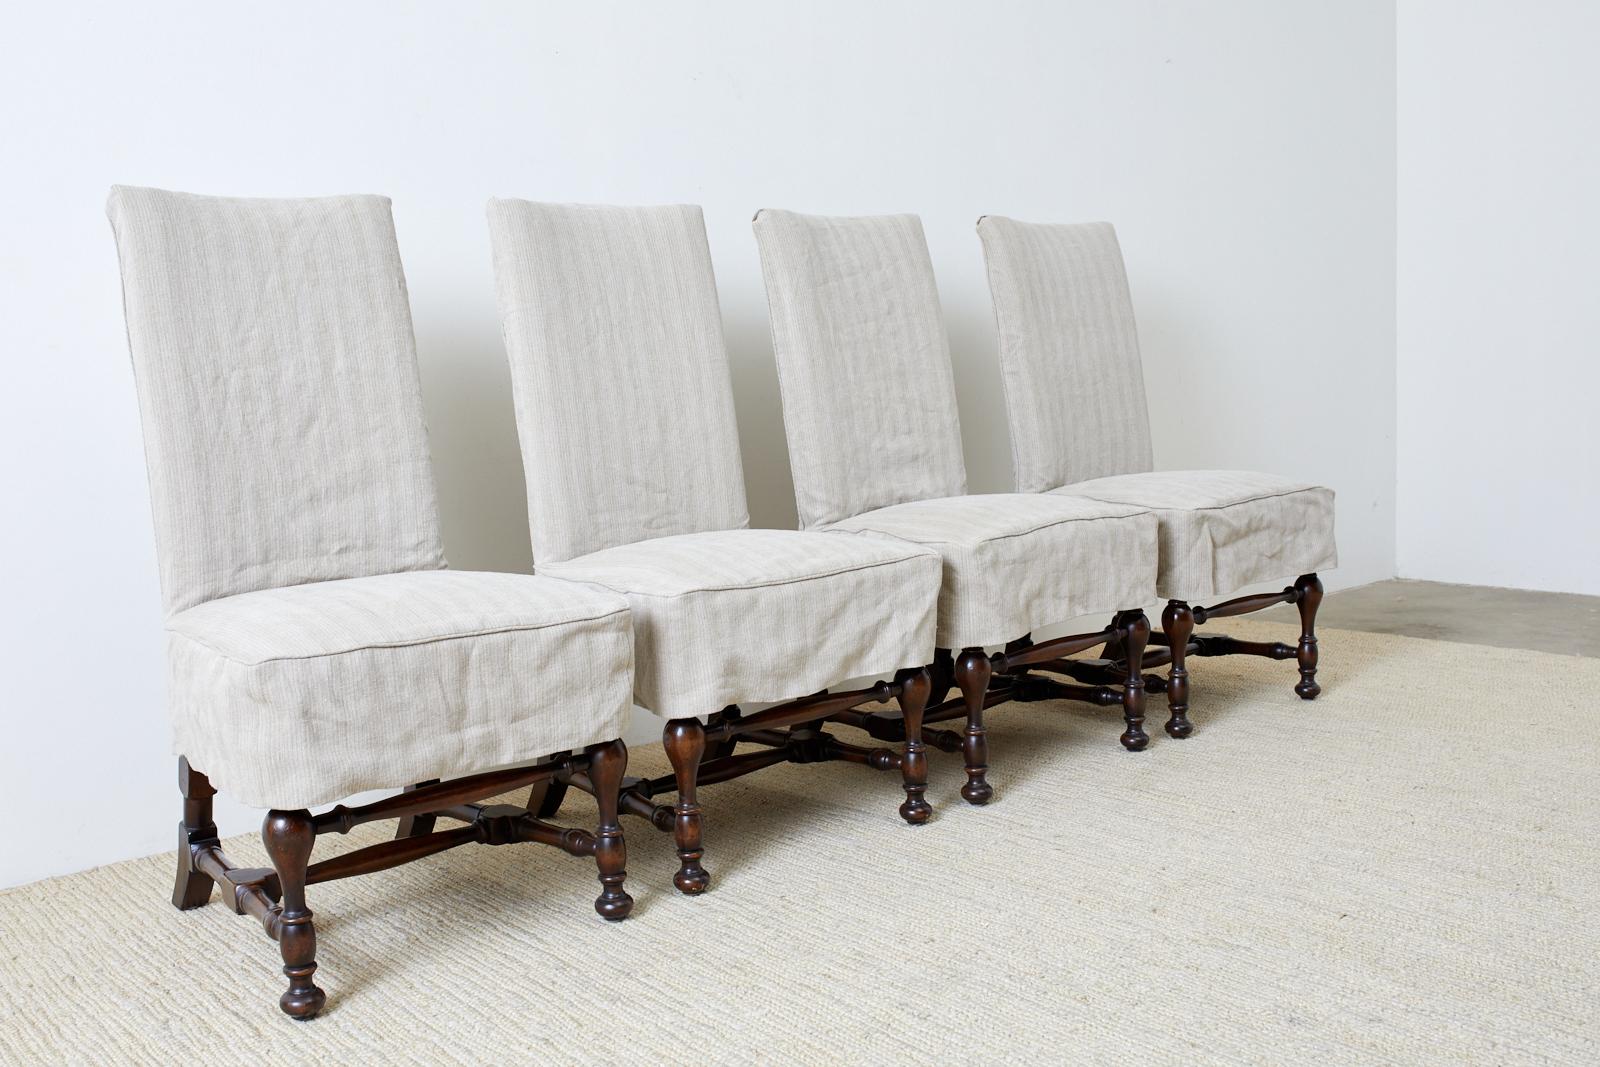 Set of four English style walnut dining chairs featuring a linen slipcover. The chairs have a hardwood frame with distinctive turned supports and stretchers made in the William and Mary taste. The frames are upholstered with a striped silk pattern